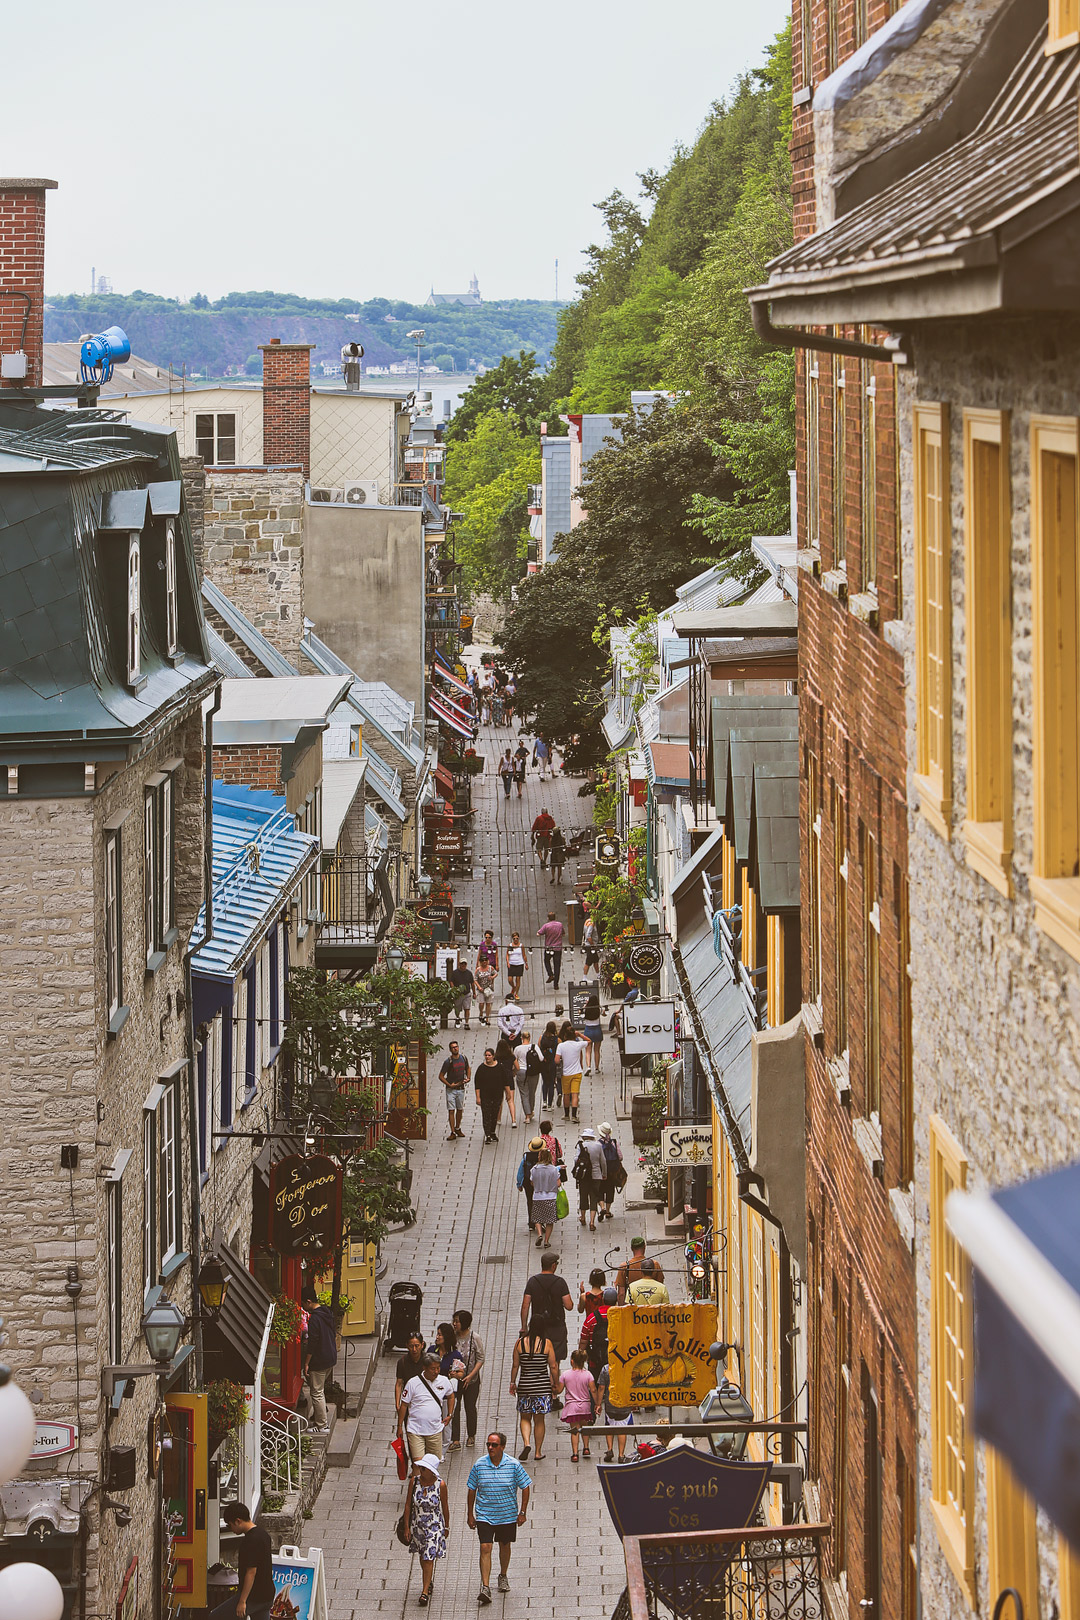 Traveling to Quebec Canada? Find out why you should visit Quebec by clicking the link. This quebec city guide will tell you the best places to visit in quebec, which quebec city points of interest are worth your time, where to head to see and learn more about quebec city history, and more. It also includes where you should stay in downtown quebec city. // Local Adventurer #quebec #quebeccity #canada #travel